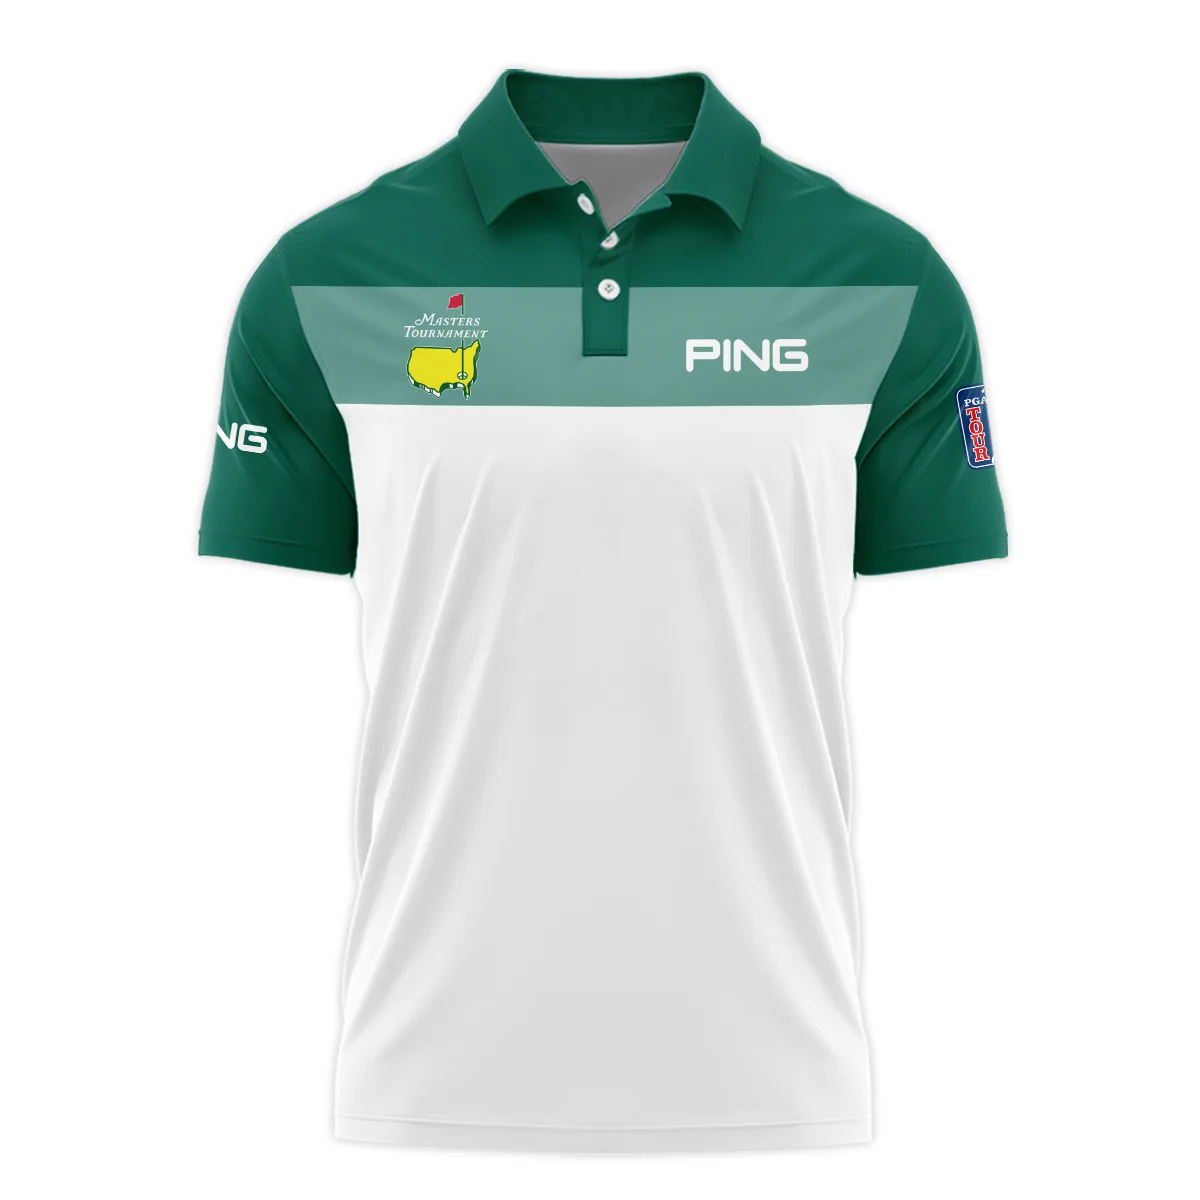 Golf Masters Tournament Ping Zipper Polo Shirt Sports Green And White All Over Print Zipper Polo Shirt For Men